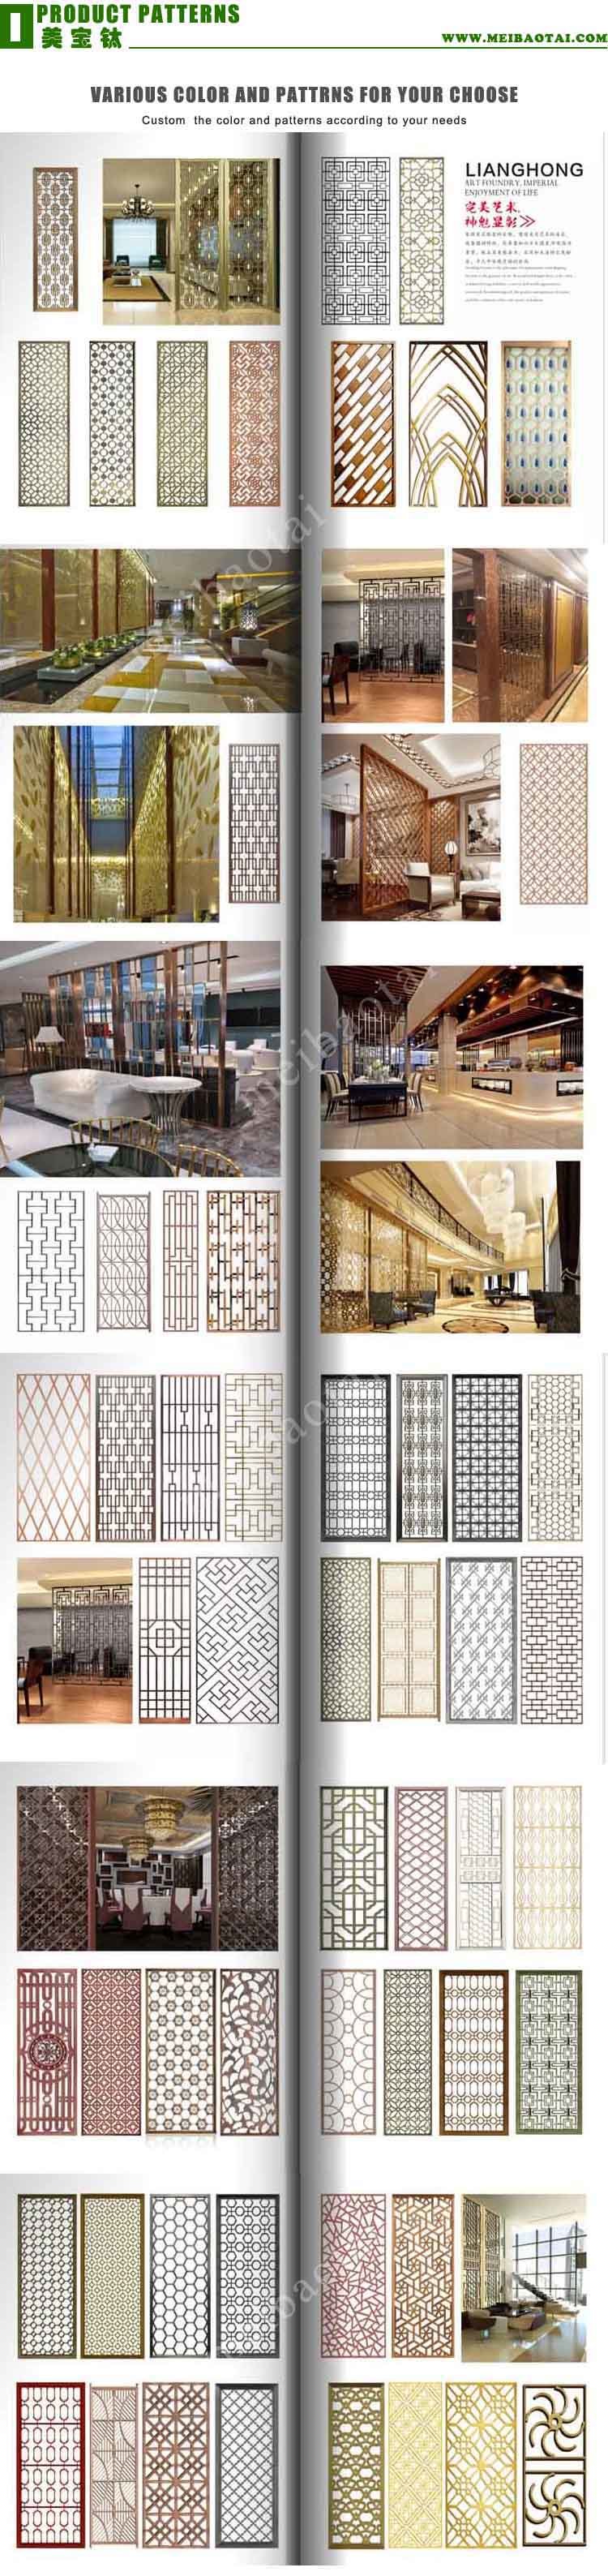 Stainless Steel Screen Partition Embossing Stainless Steel Decorative Screen